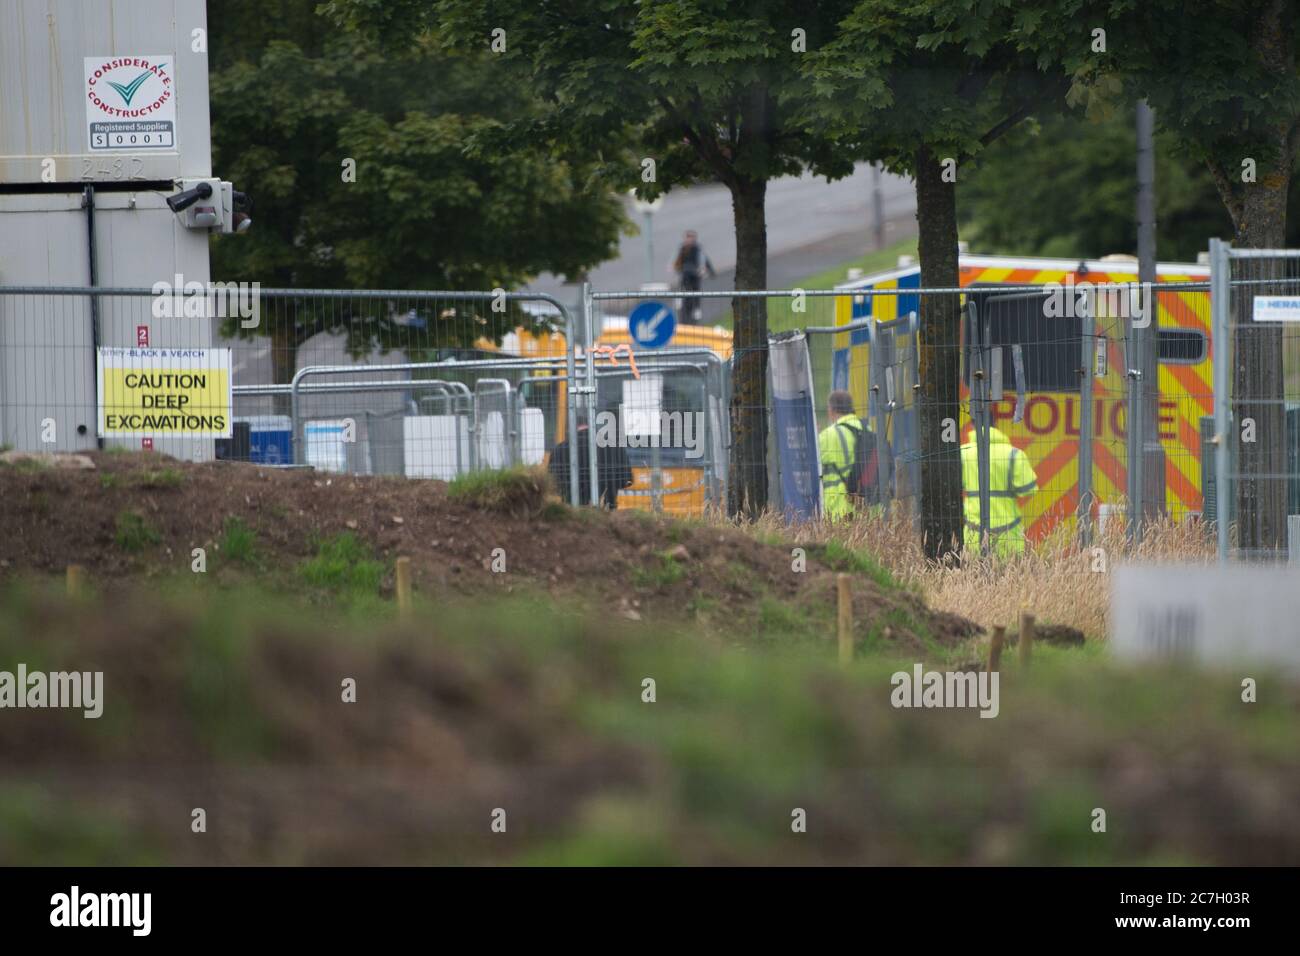 Glasgow, Scotland, UK. 17th July, 2020. Pictured: Scenes from where a ten year old boy has died following an incident at a building site in Drumchapel, Glasgow. Credit: Colin Fisher/Alamy Live News Stock Photo